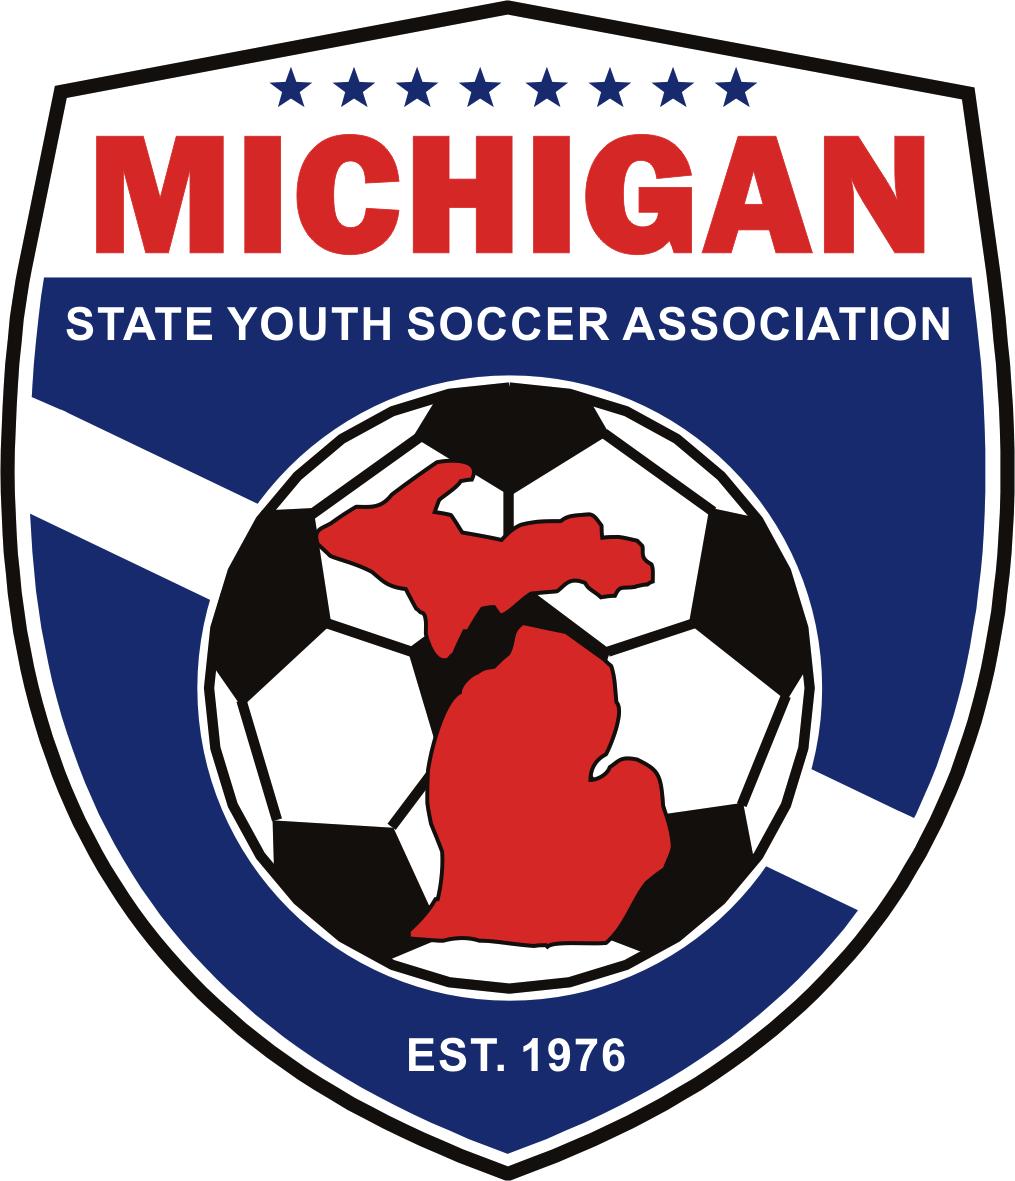 MICHIGAN STATE YOUTH SOCCER ASSOCIATION 2016 JUNIOR STATE CUP COMPETITION RULES 1. Competition Dates a. All preliminary games must be